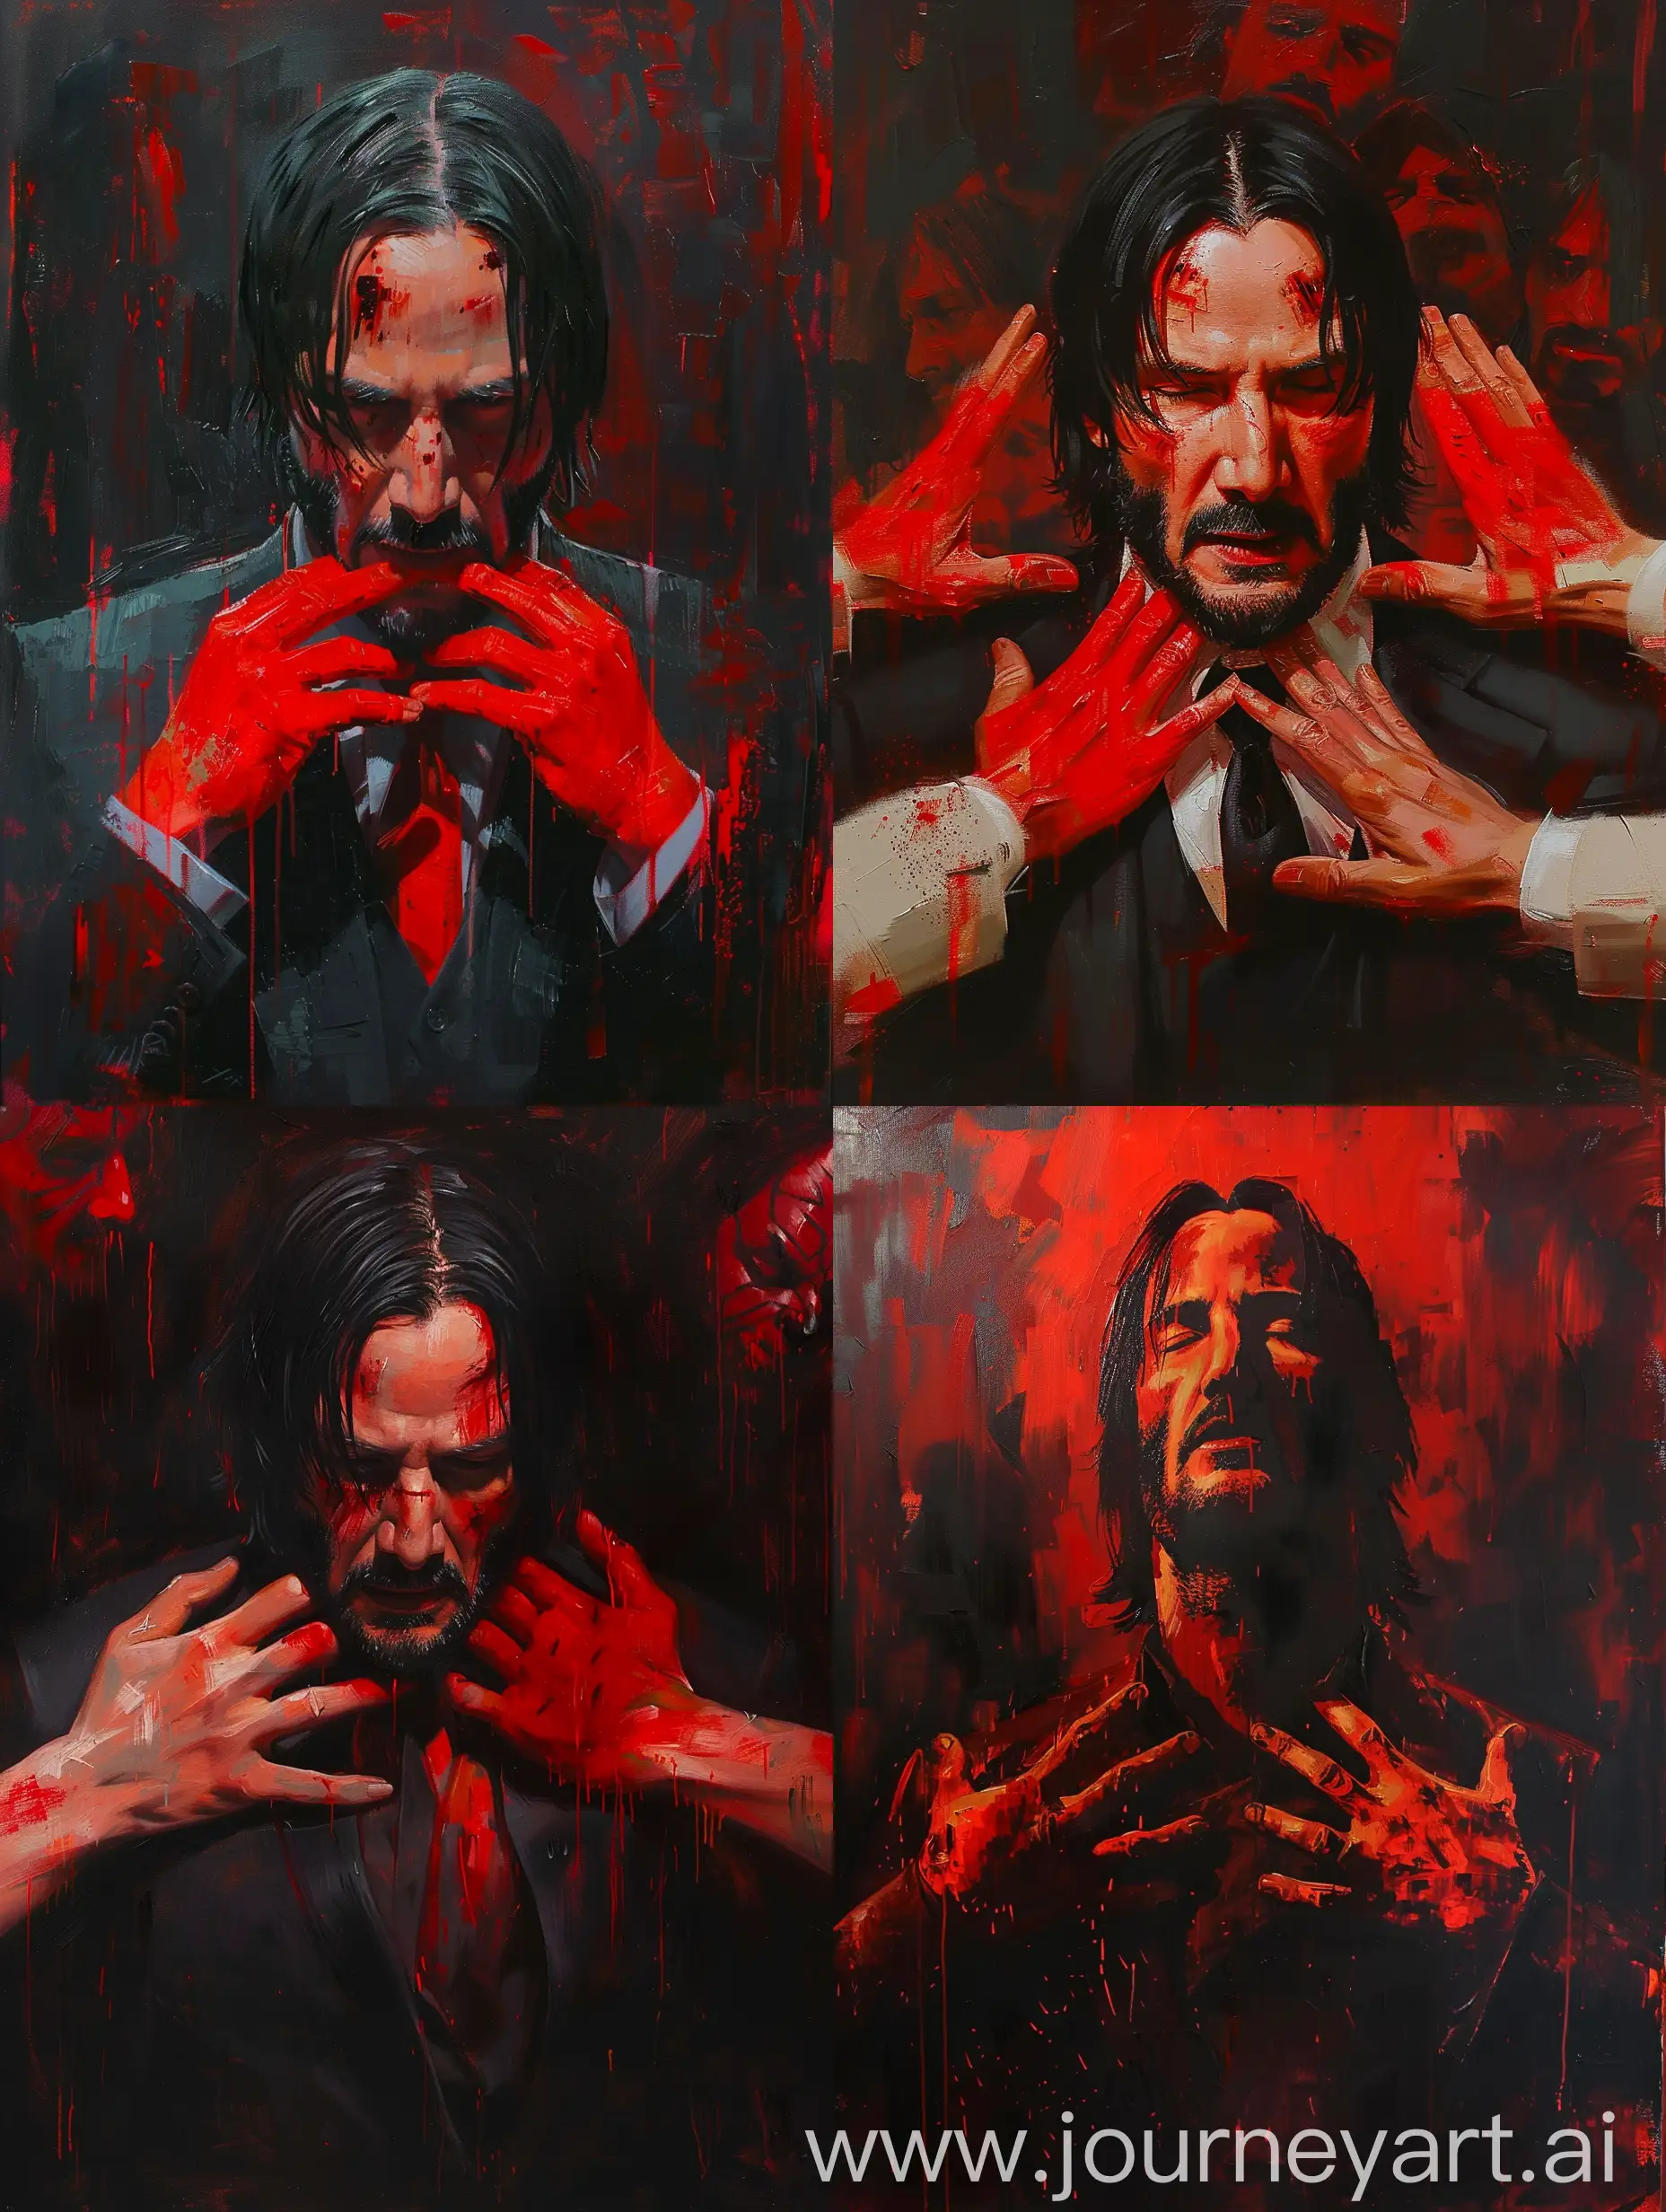 Oil painting of john wick in star wars style with bright red colour With hands in red colour reaching his throat from behind, conceptual art. 